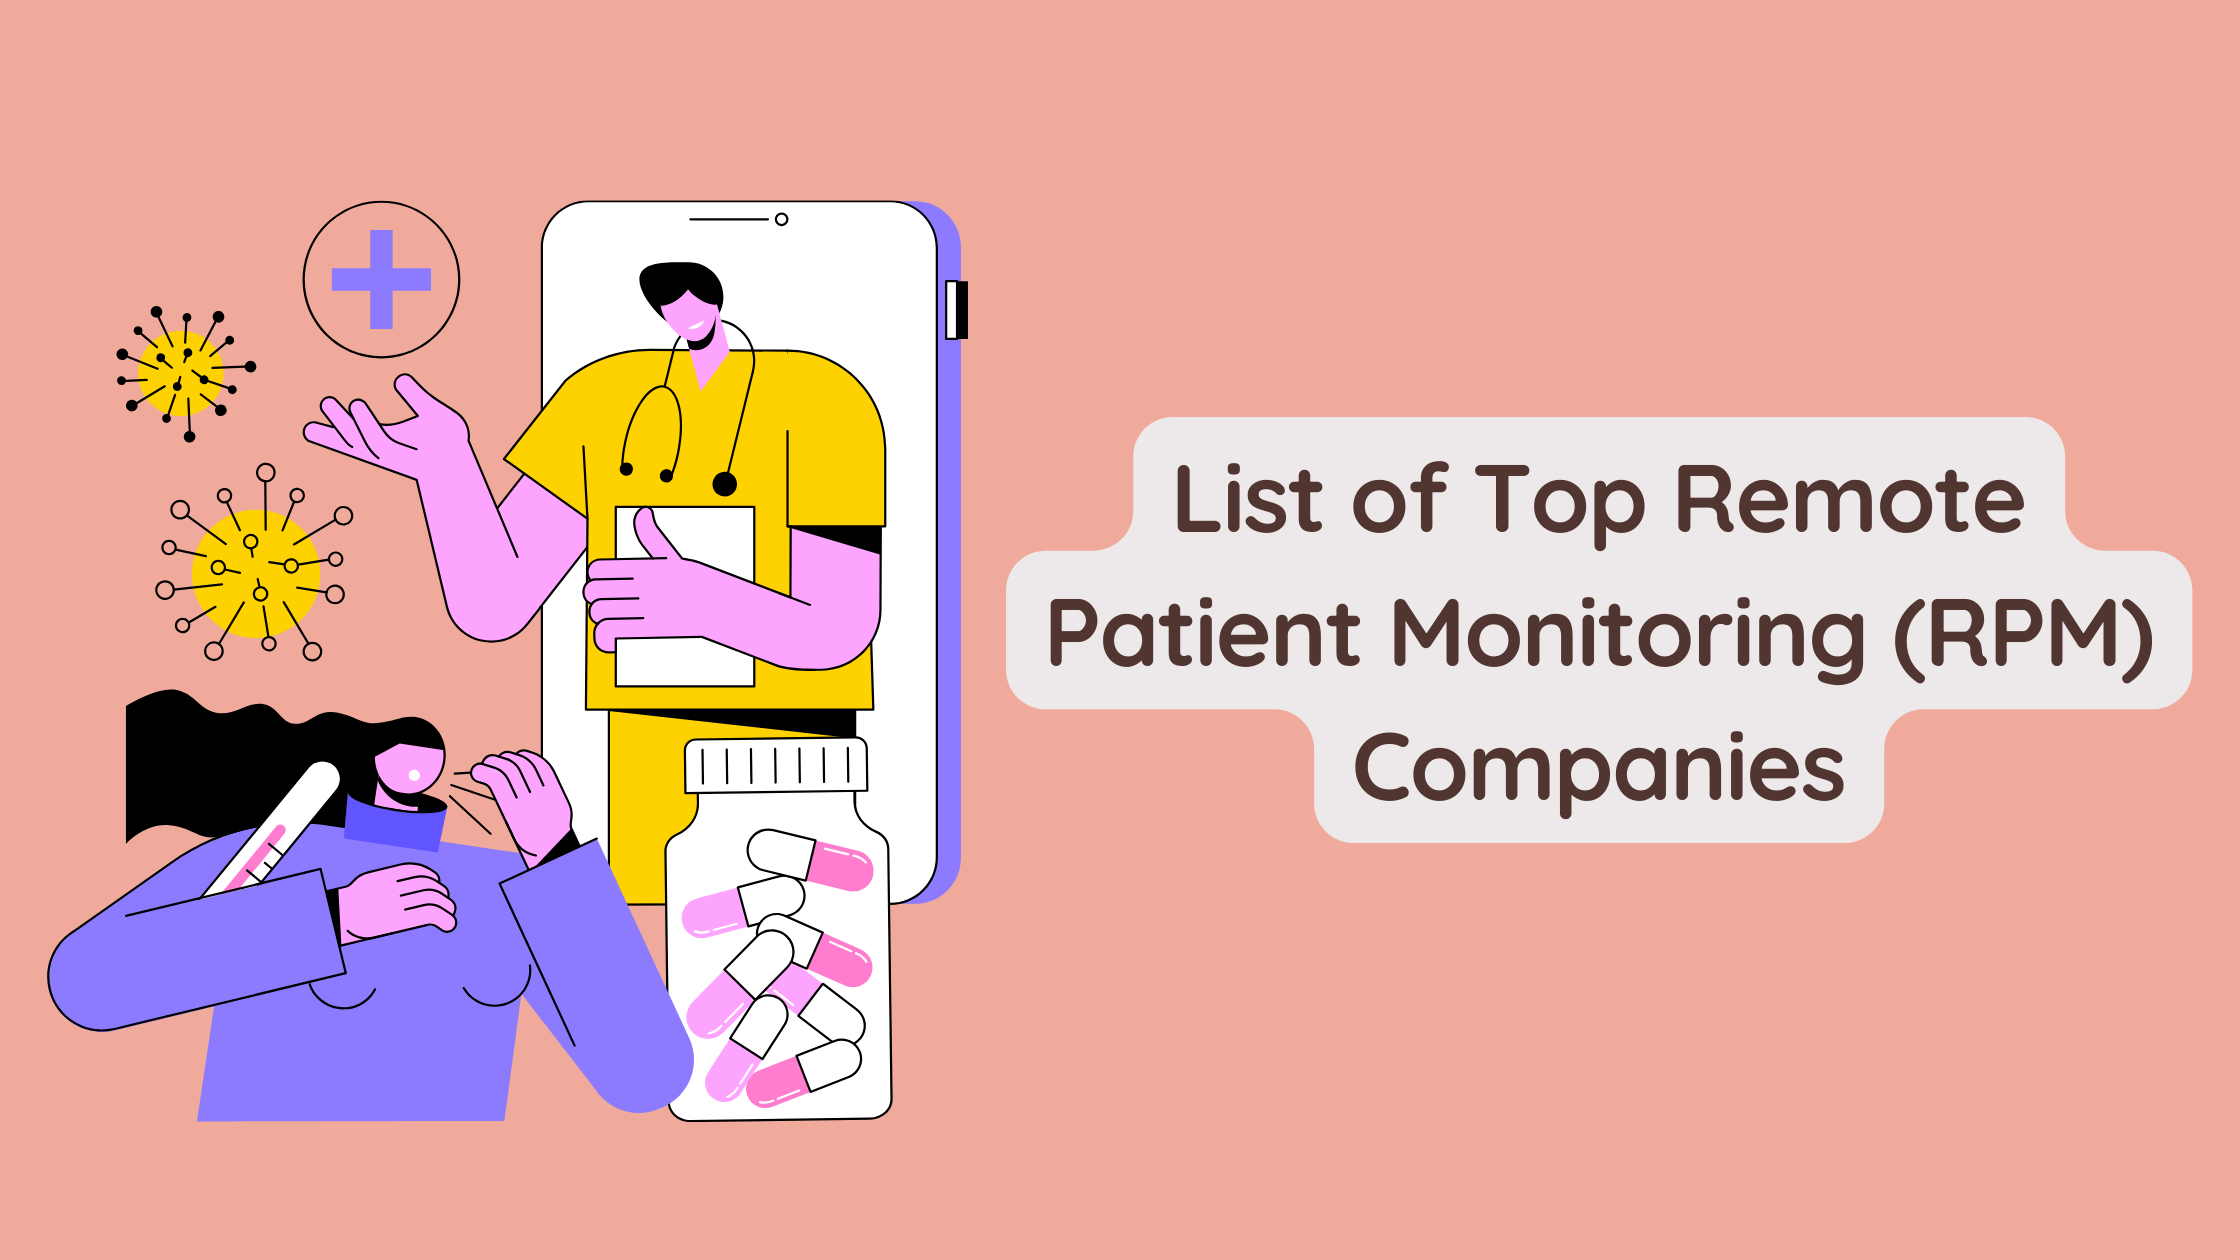 List of Top Remote Patient Monitoring (RPM) Companies